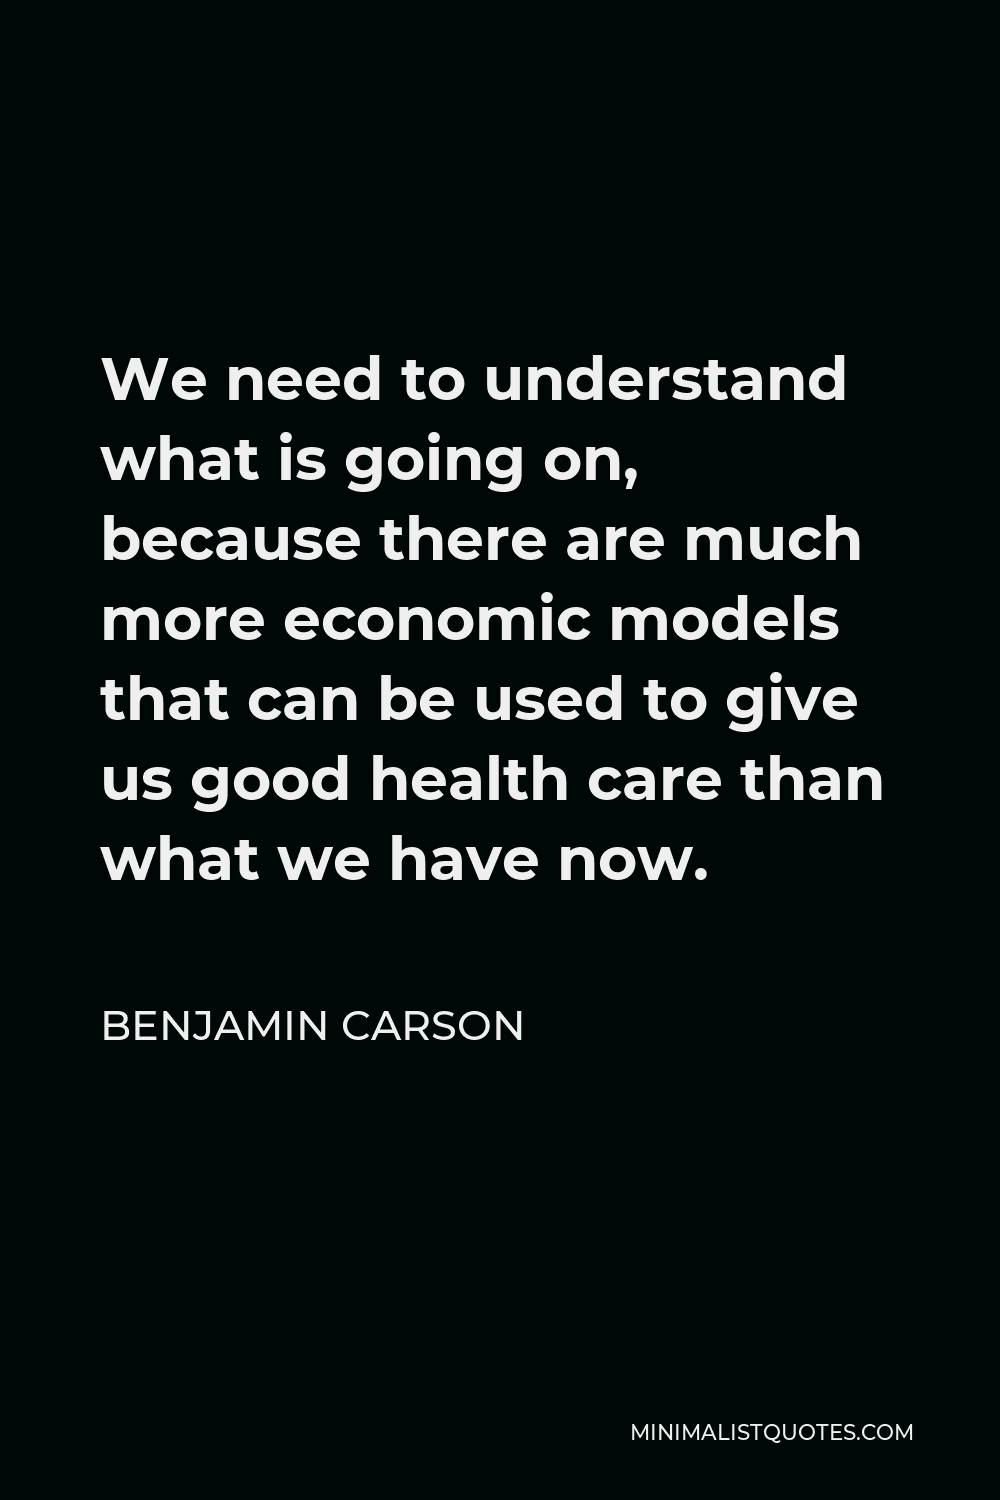 Benjamin Carson Quote - We need to understand what is going on, because there are much more economic models that can be used to give us good health care than what we have now.